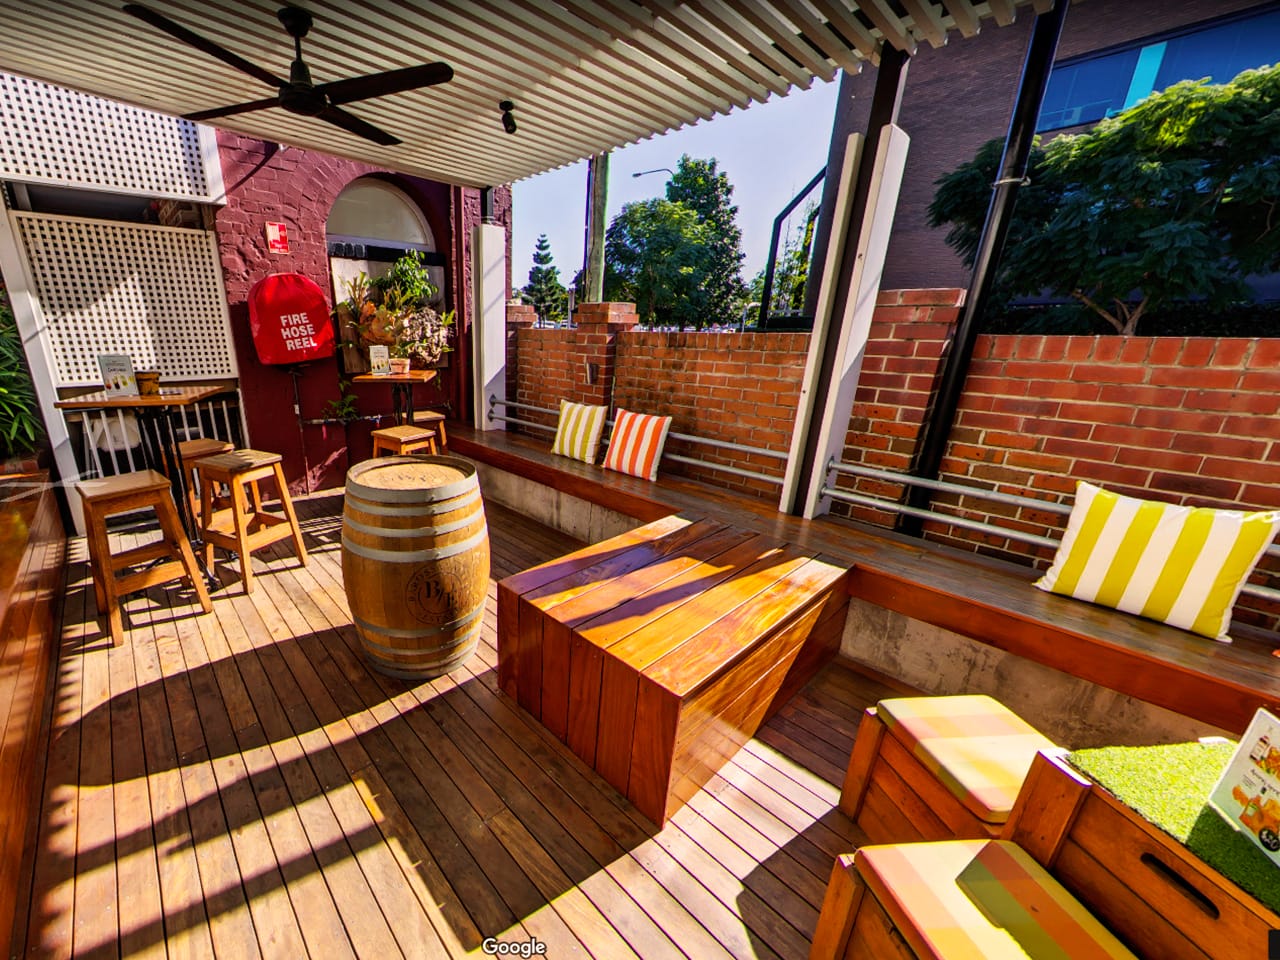 Wooden Chairs And Tables With Wine Cask, A Long Chair On The Side And Stripe Pillows In The Garden Function Space